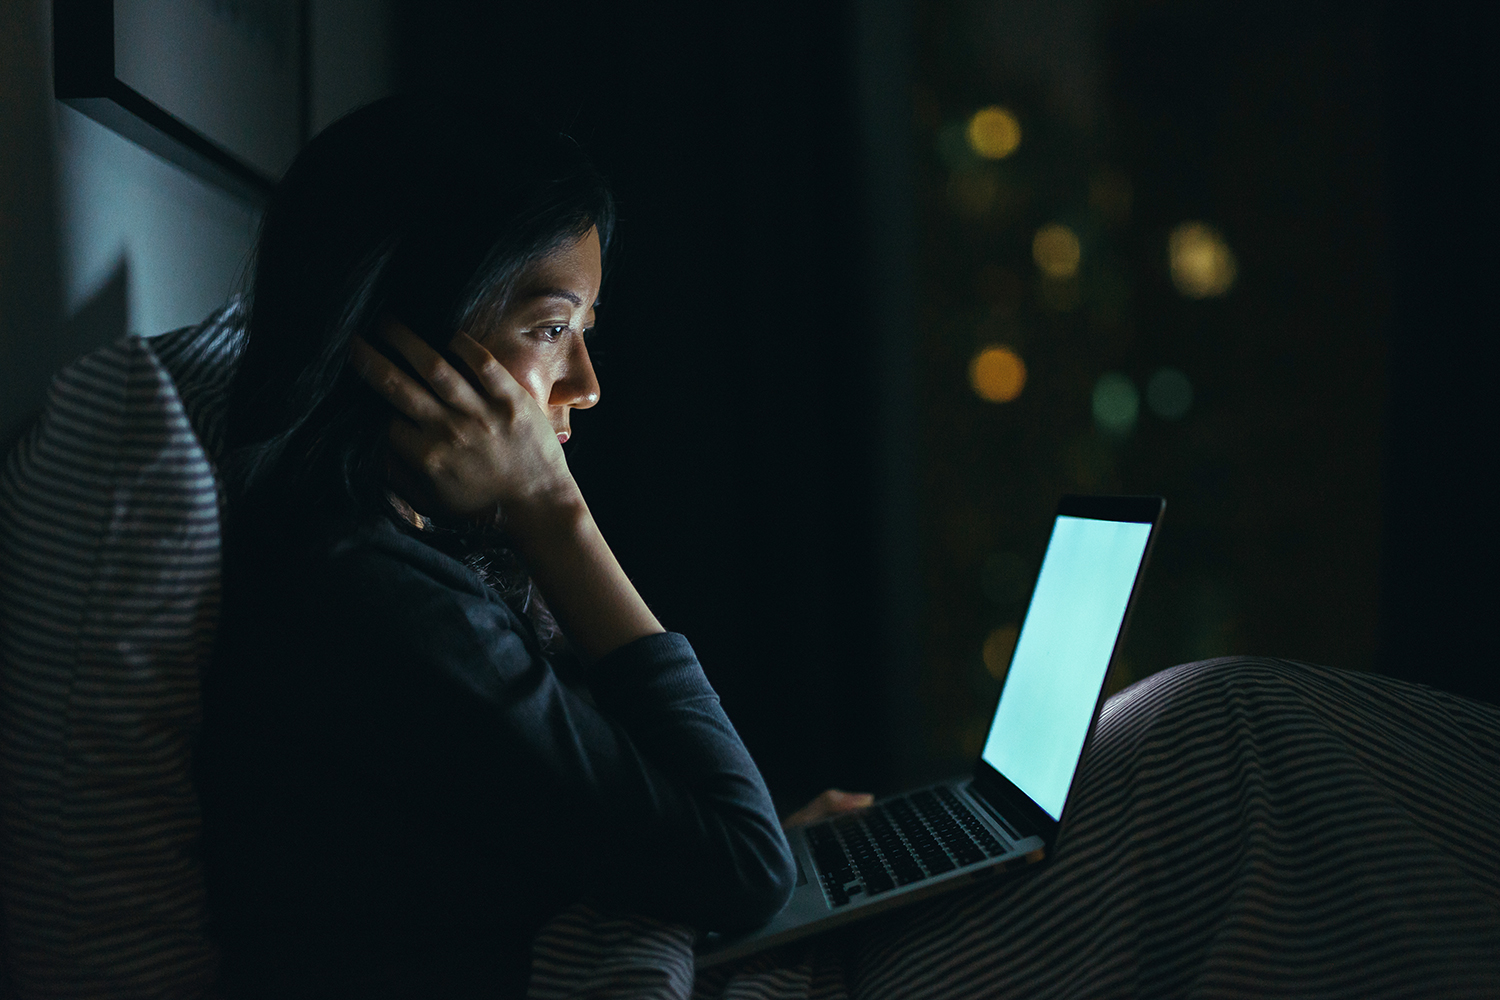  Should you turn your computer off at night? We asked an expert